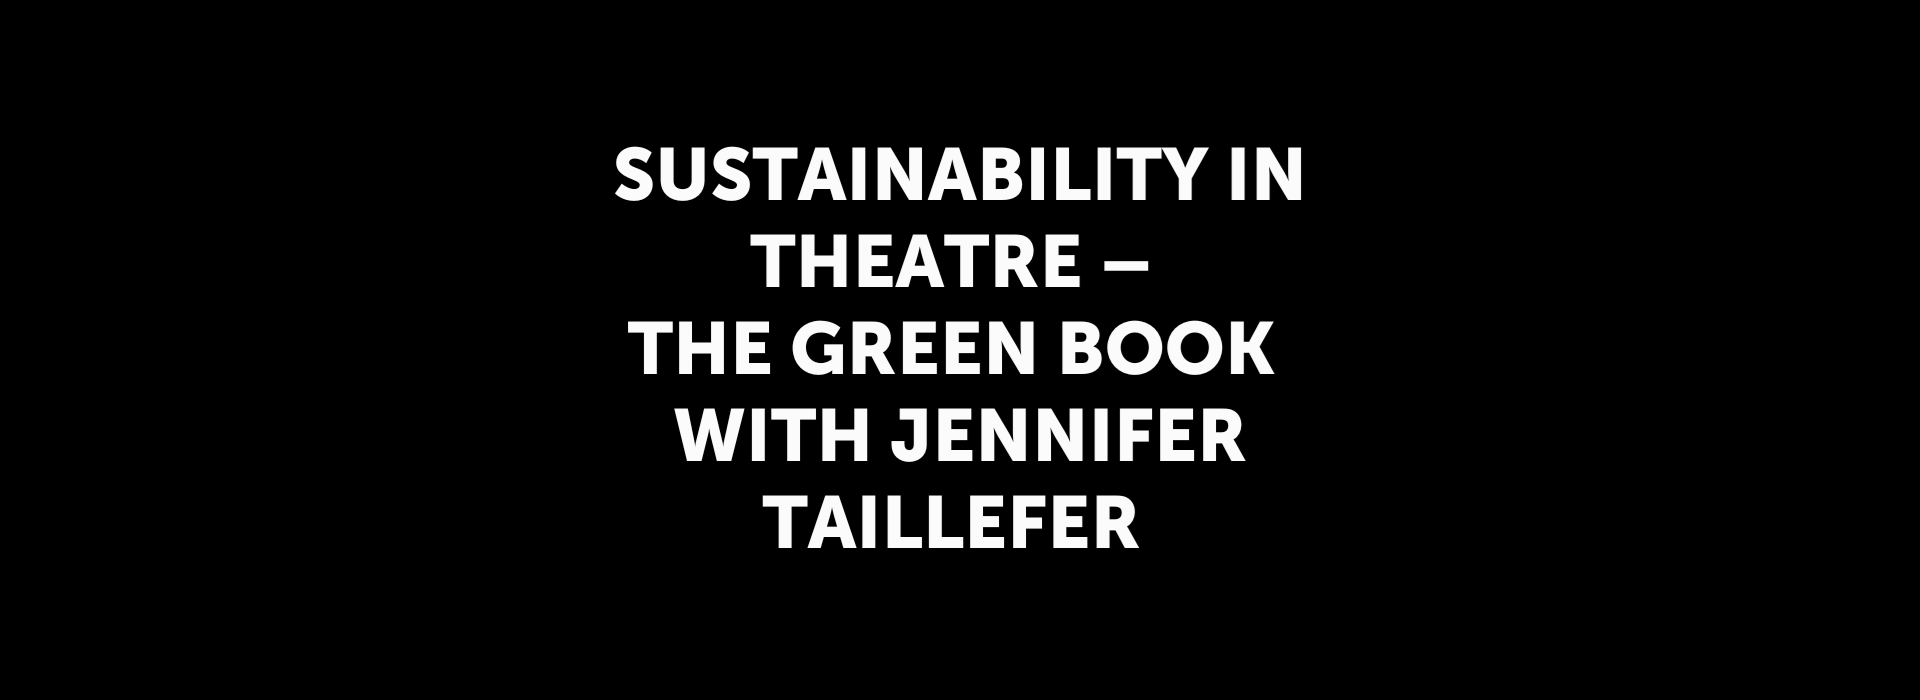 Sustainability in Theatre – The Green Book with Jennifer Taillefer